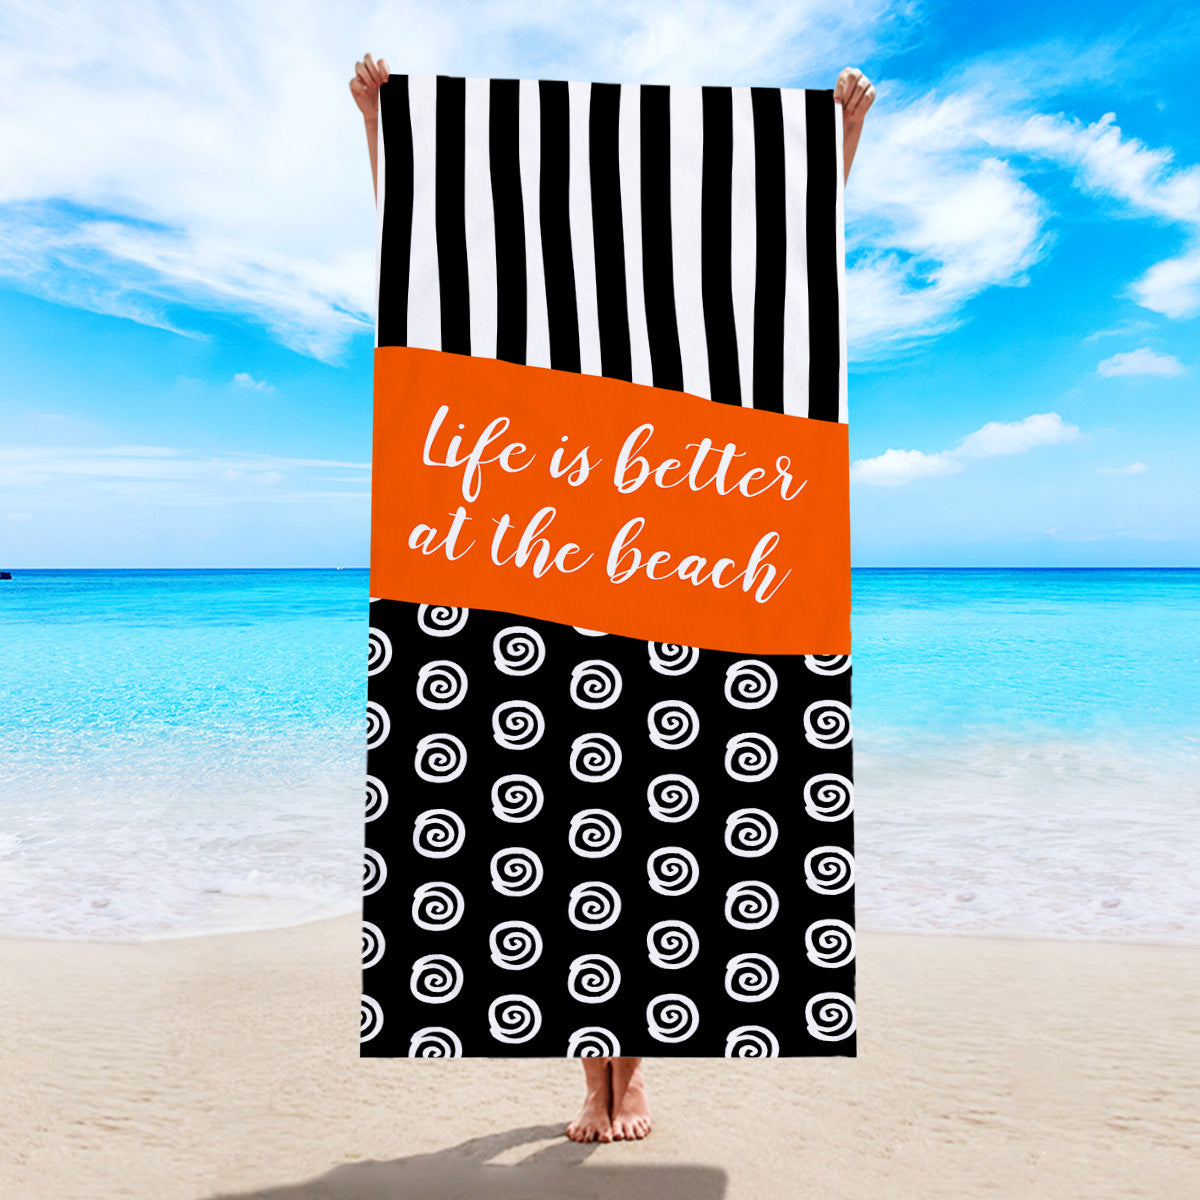 Summer Fast Drying Beach Towels